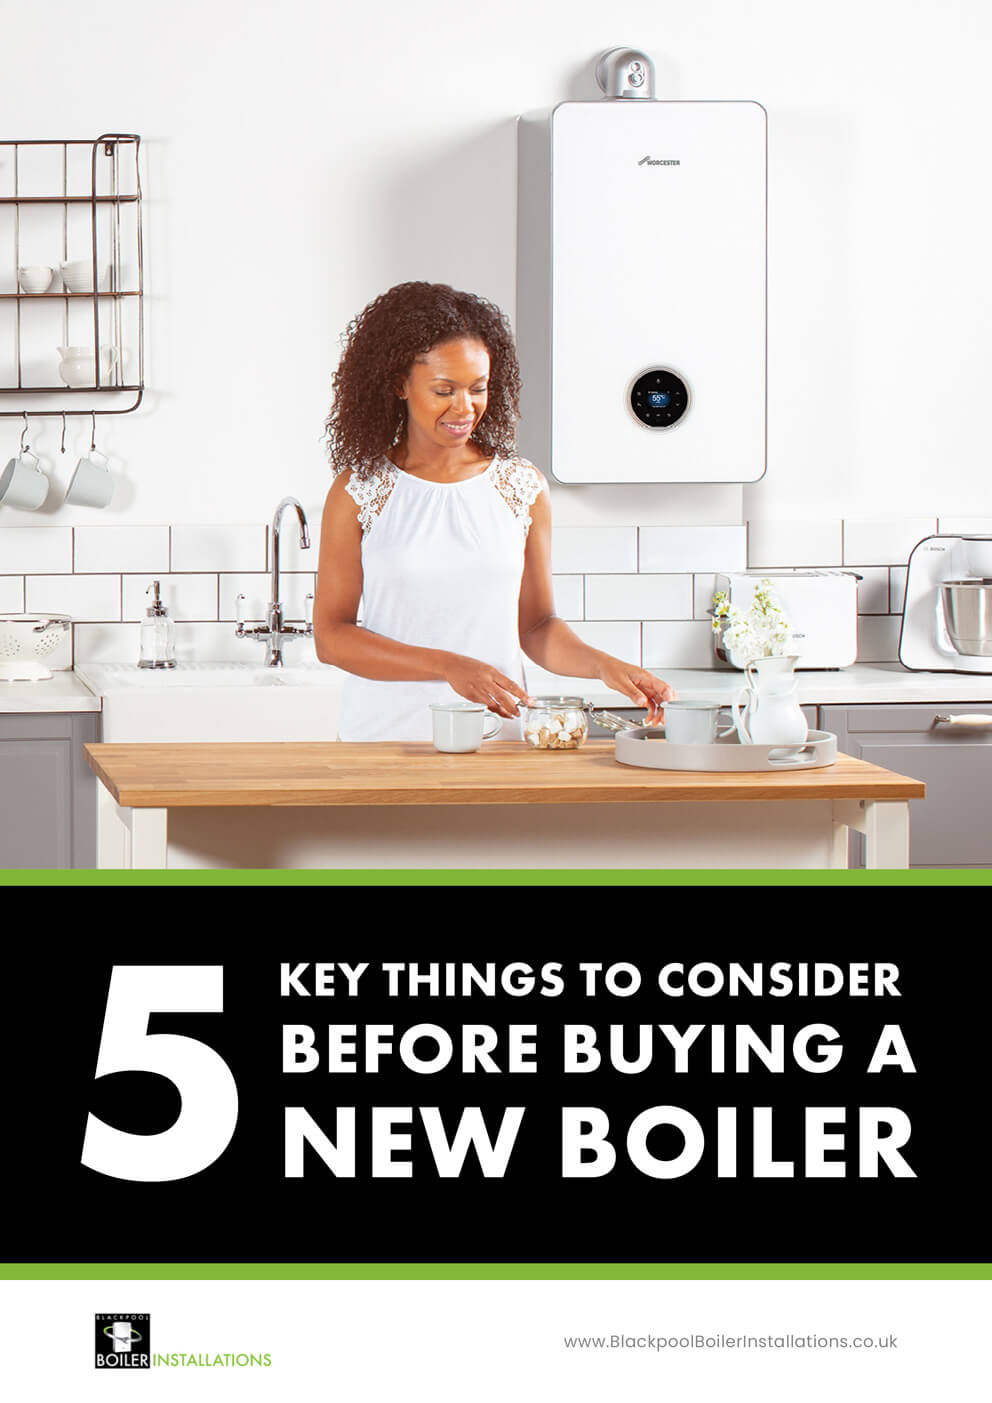 5 things to consider before buying a new boiler